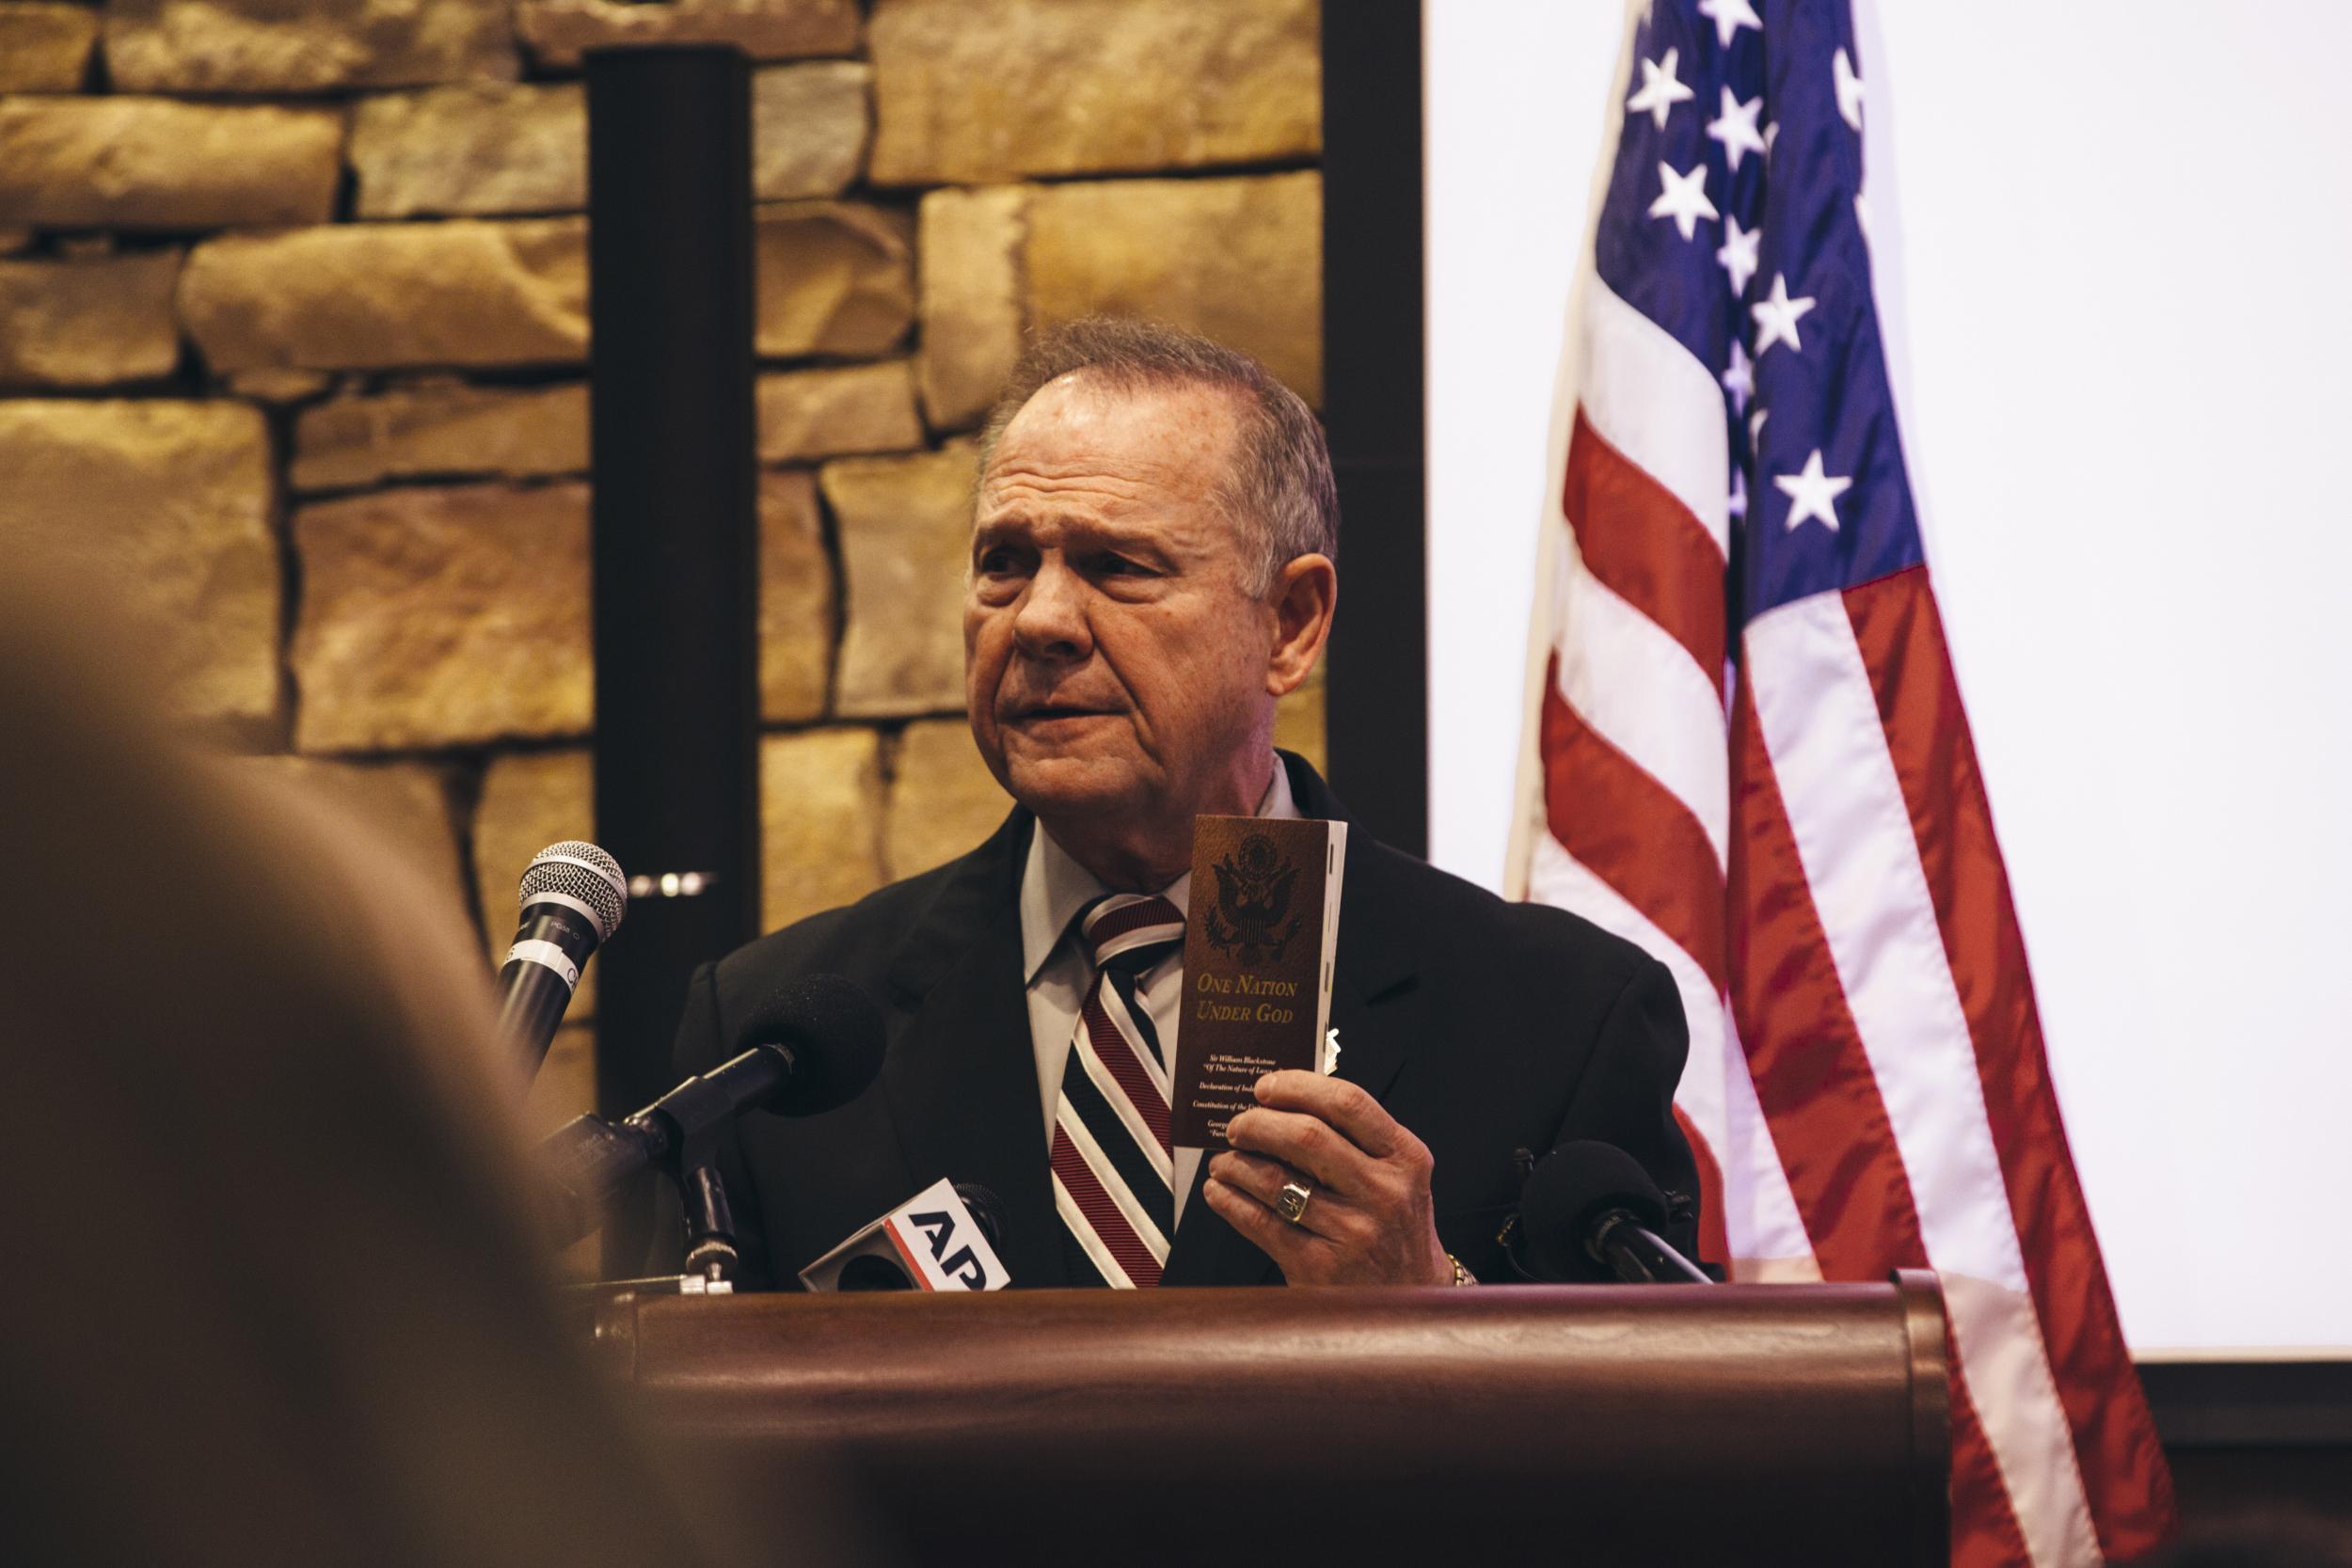 Republican candidate for US Senate Judge Roy Moore speaks during a mid-Alabama Republican Club's Veterans Day event